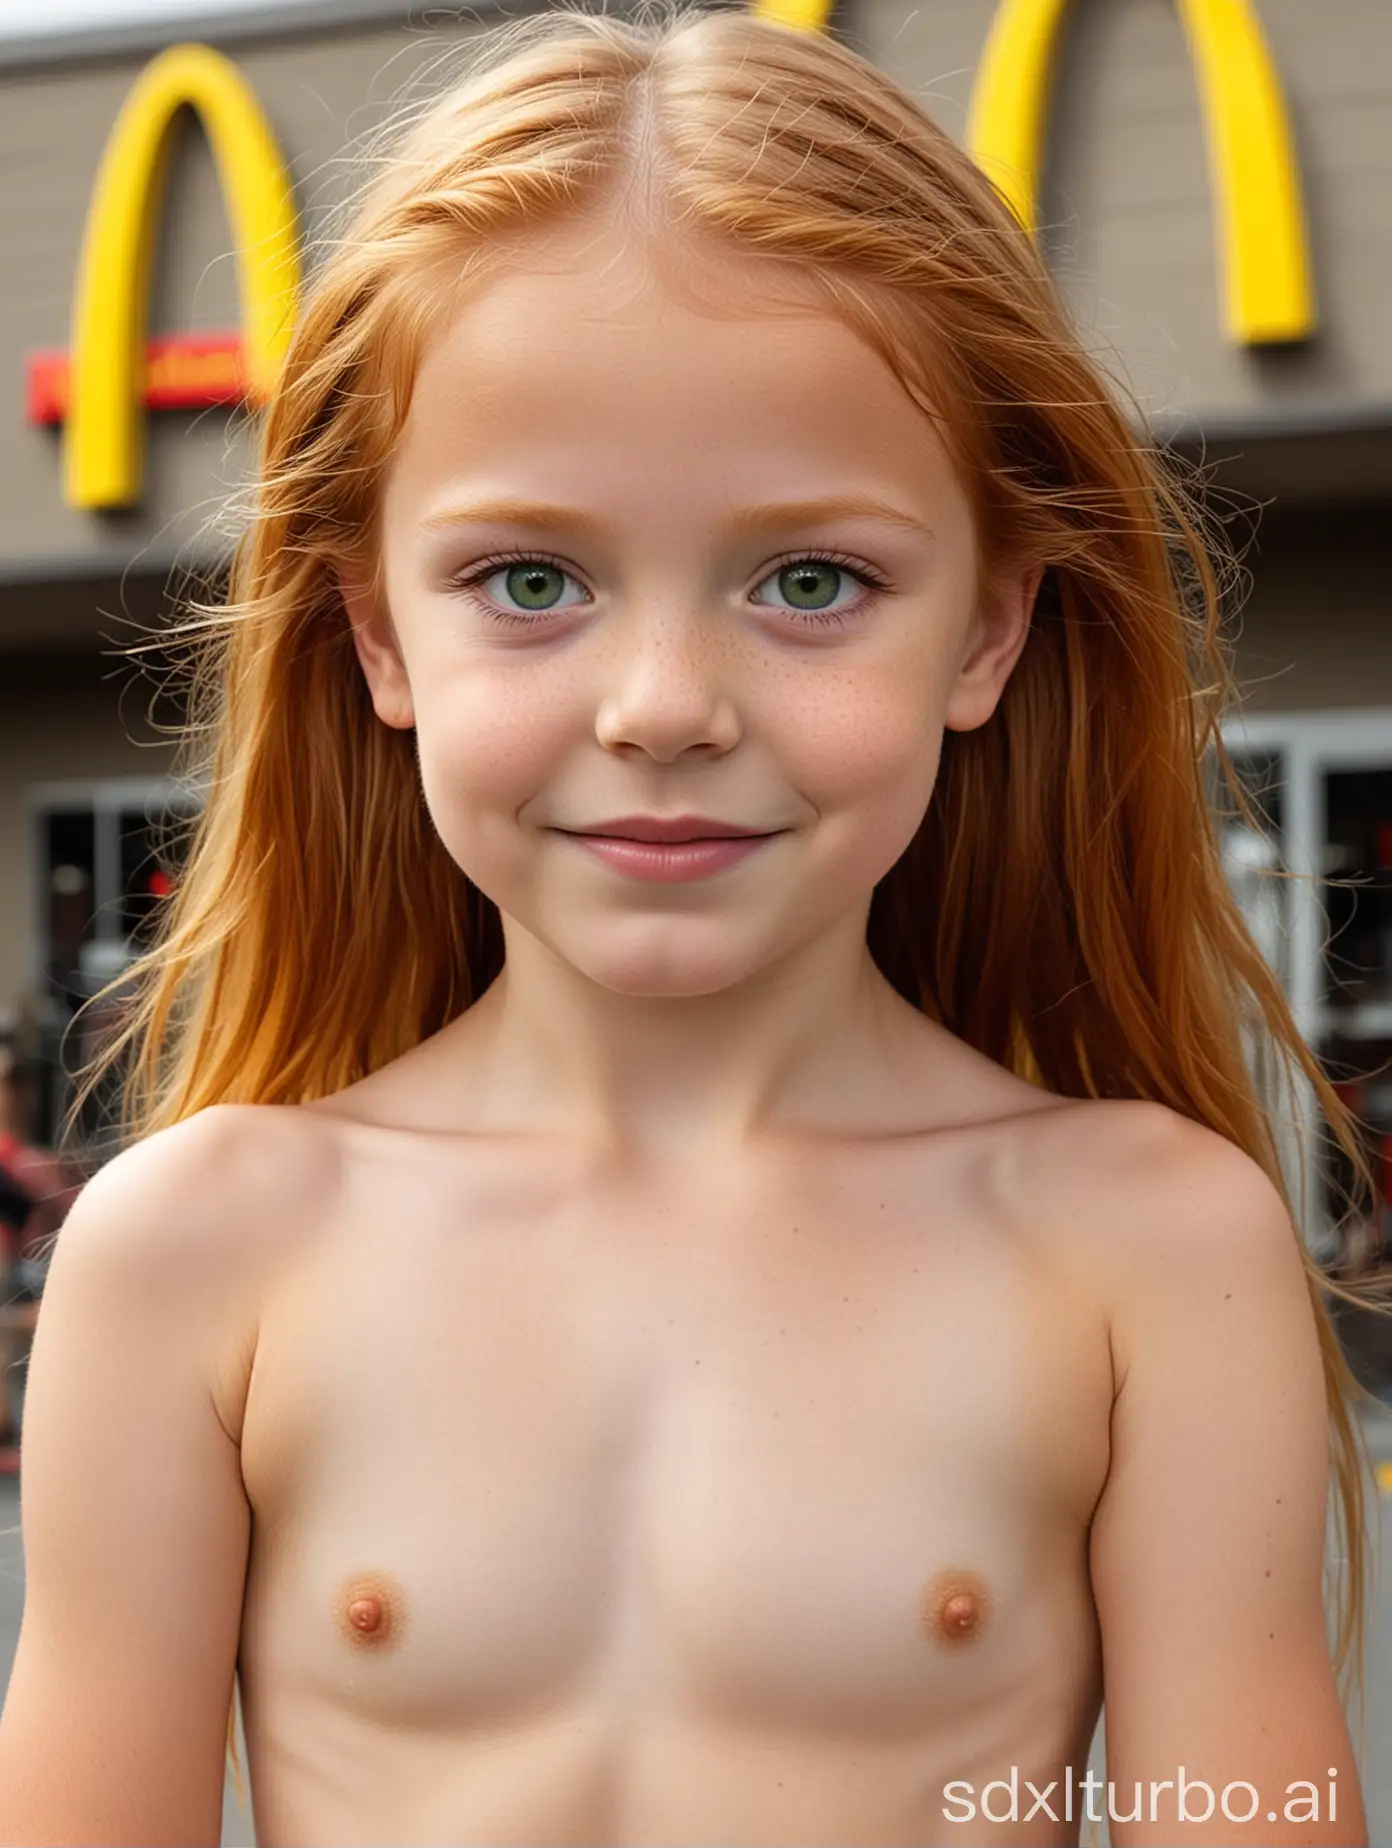 Adorable-7YearOld-with-Long-Ginger-Hair-in-Vibrant-Bikini-Poses-by-McDonalds